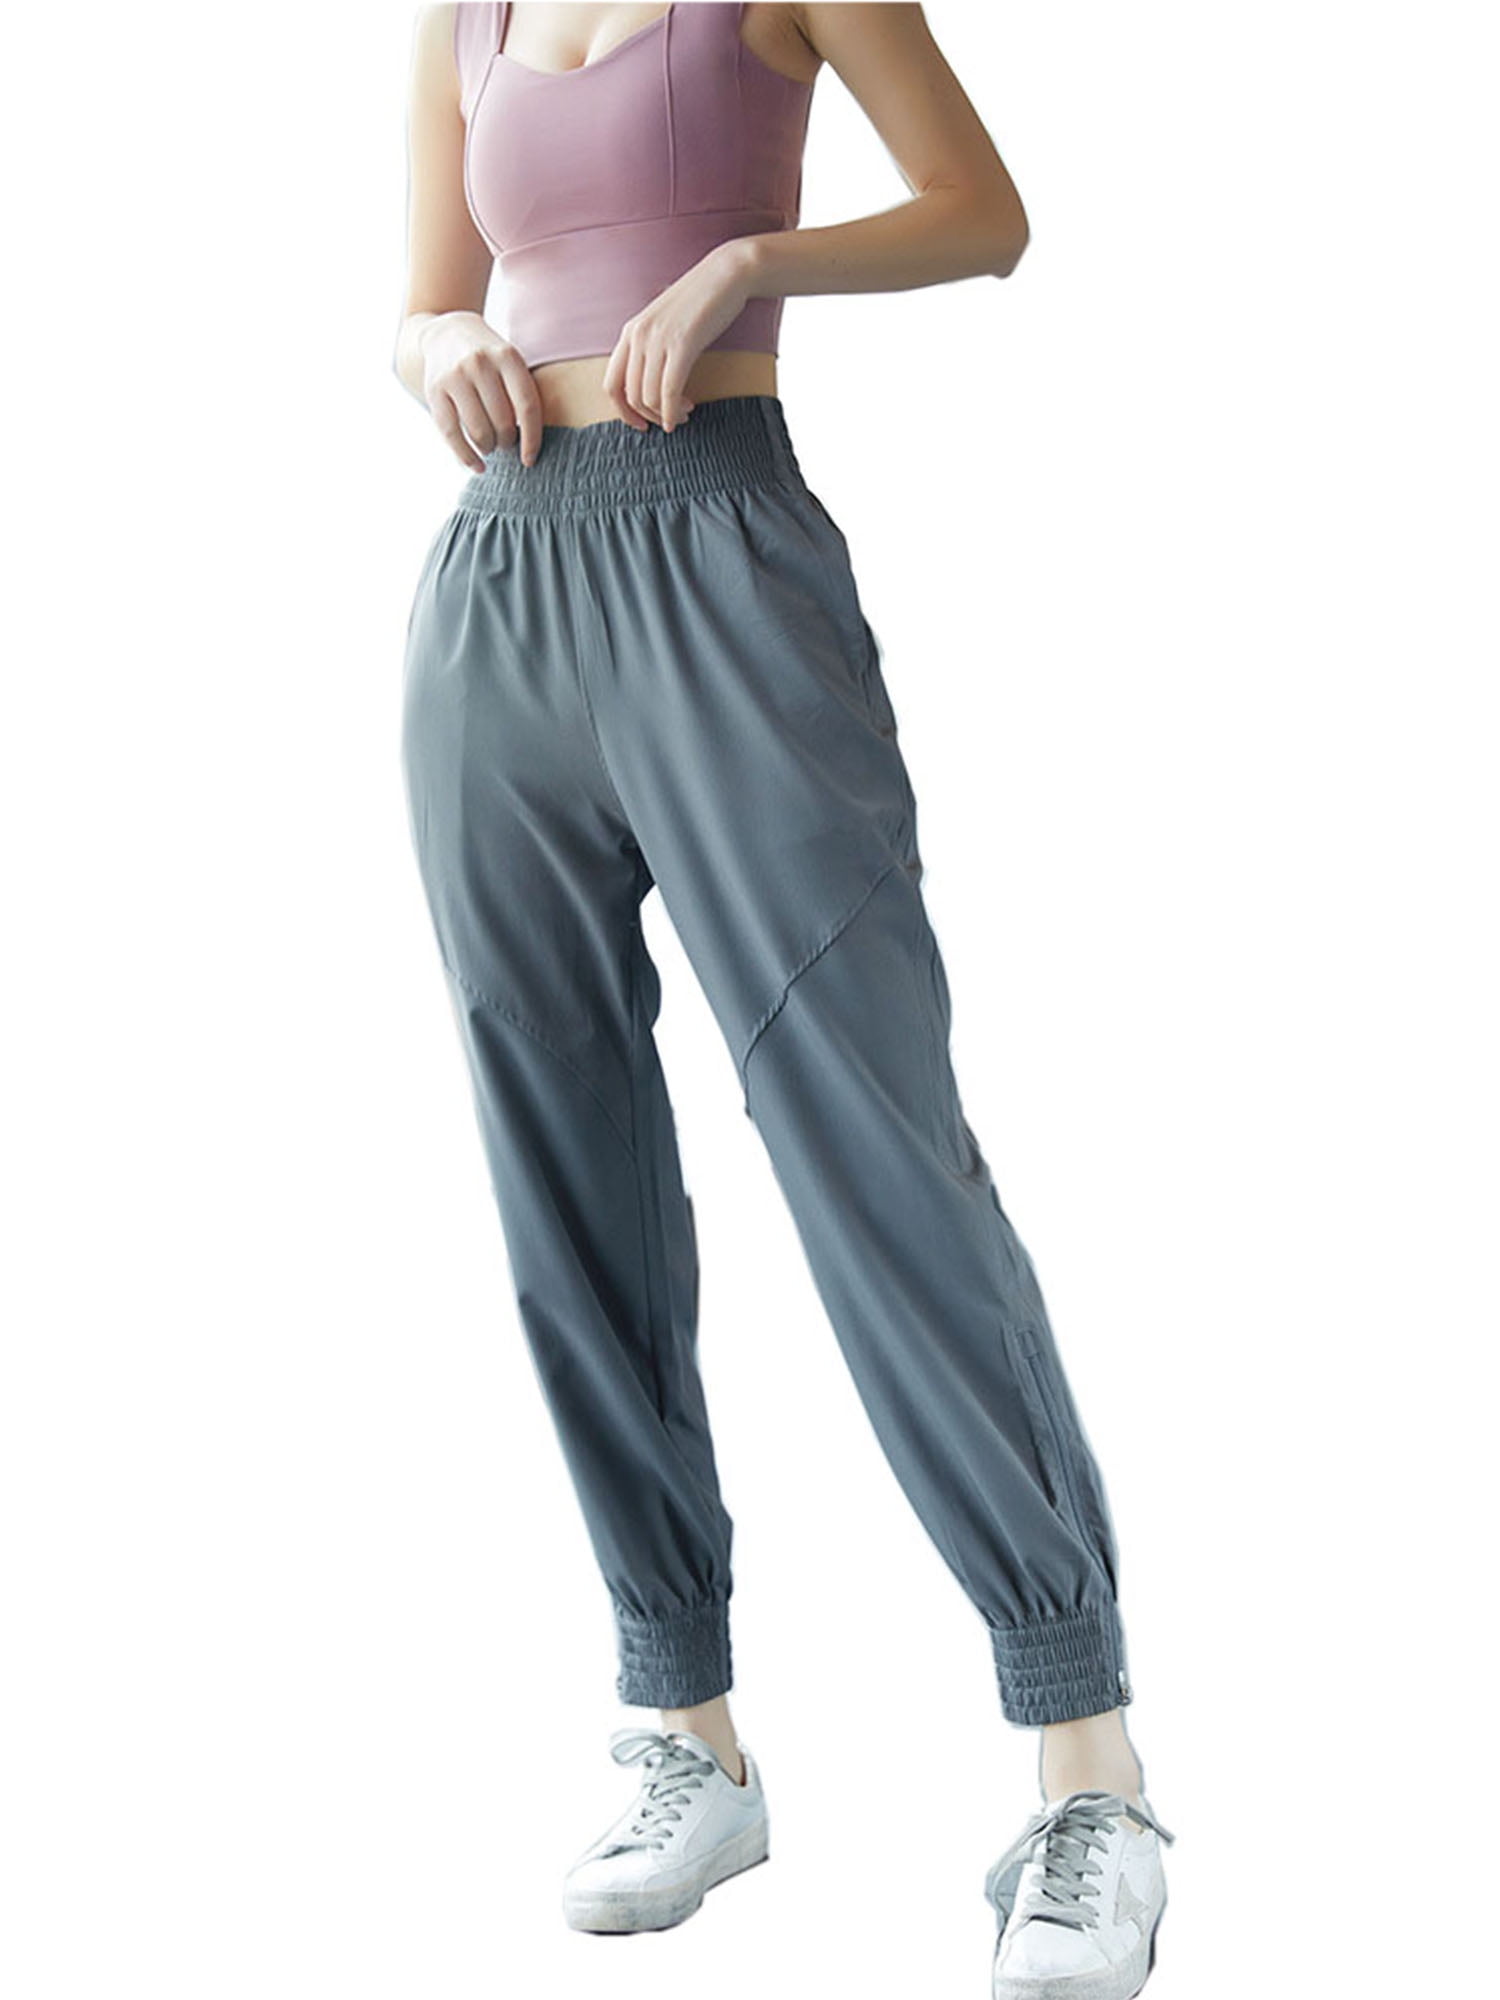 WANGSHE Cropped Rrousers Harem Pants for Womens Summer Casual Loose Beam Foot Pants with Pocket Yoga Sports Jogger Pants